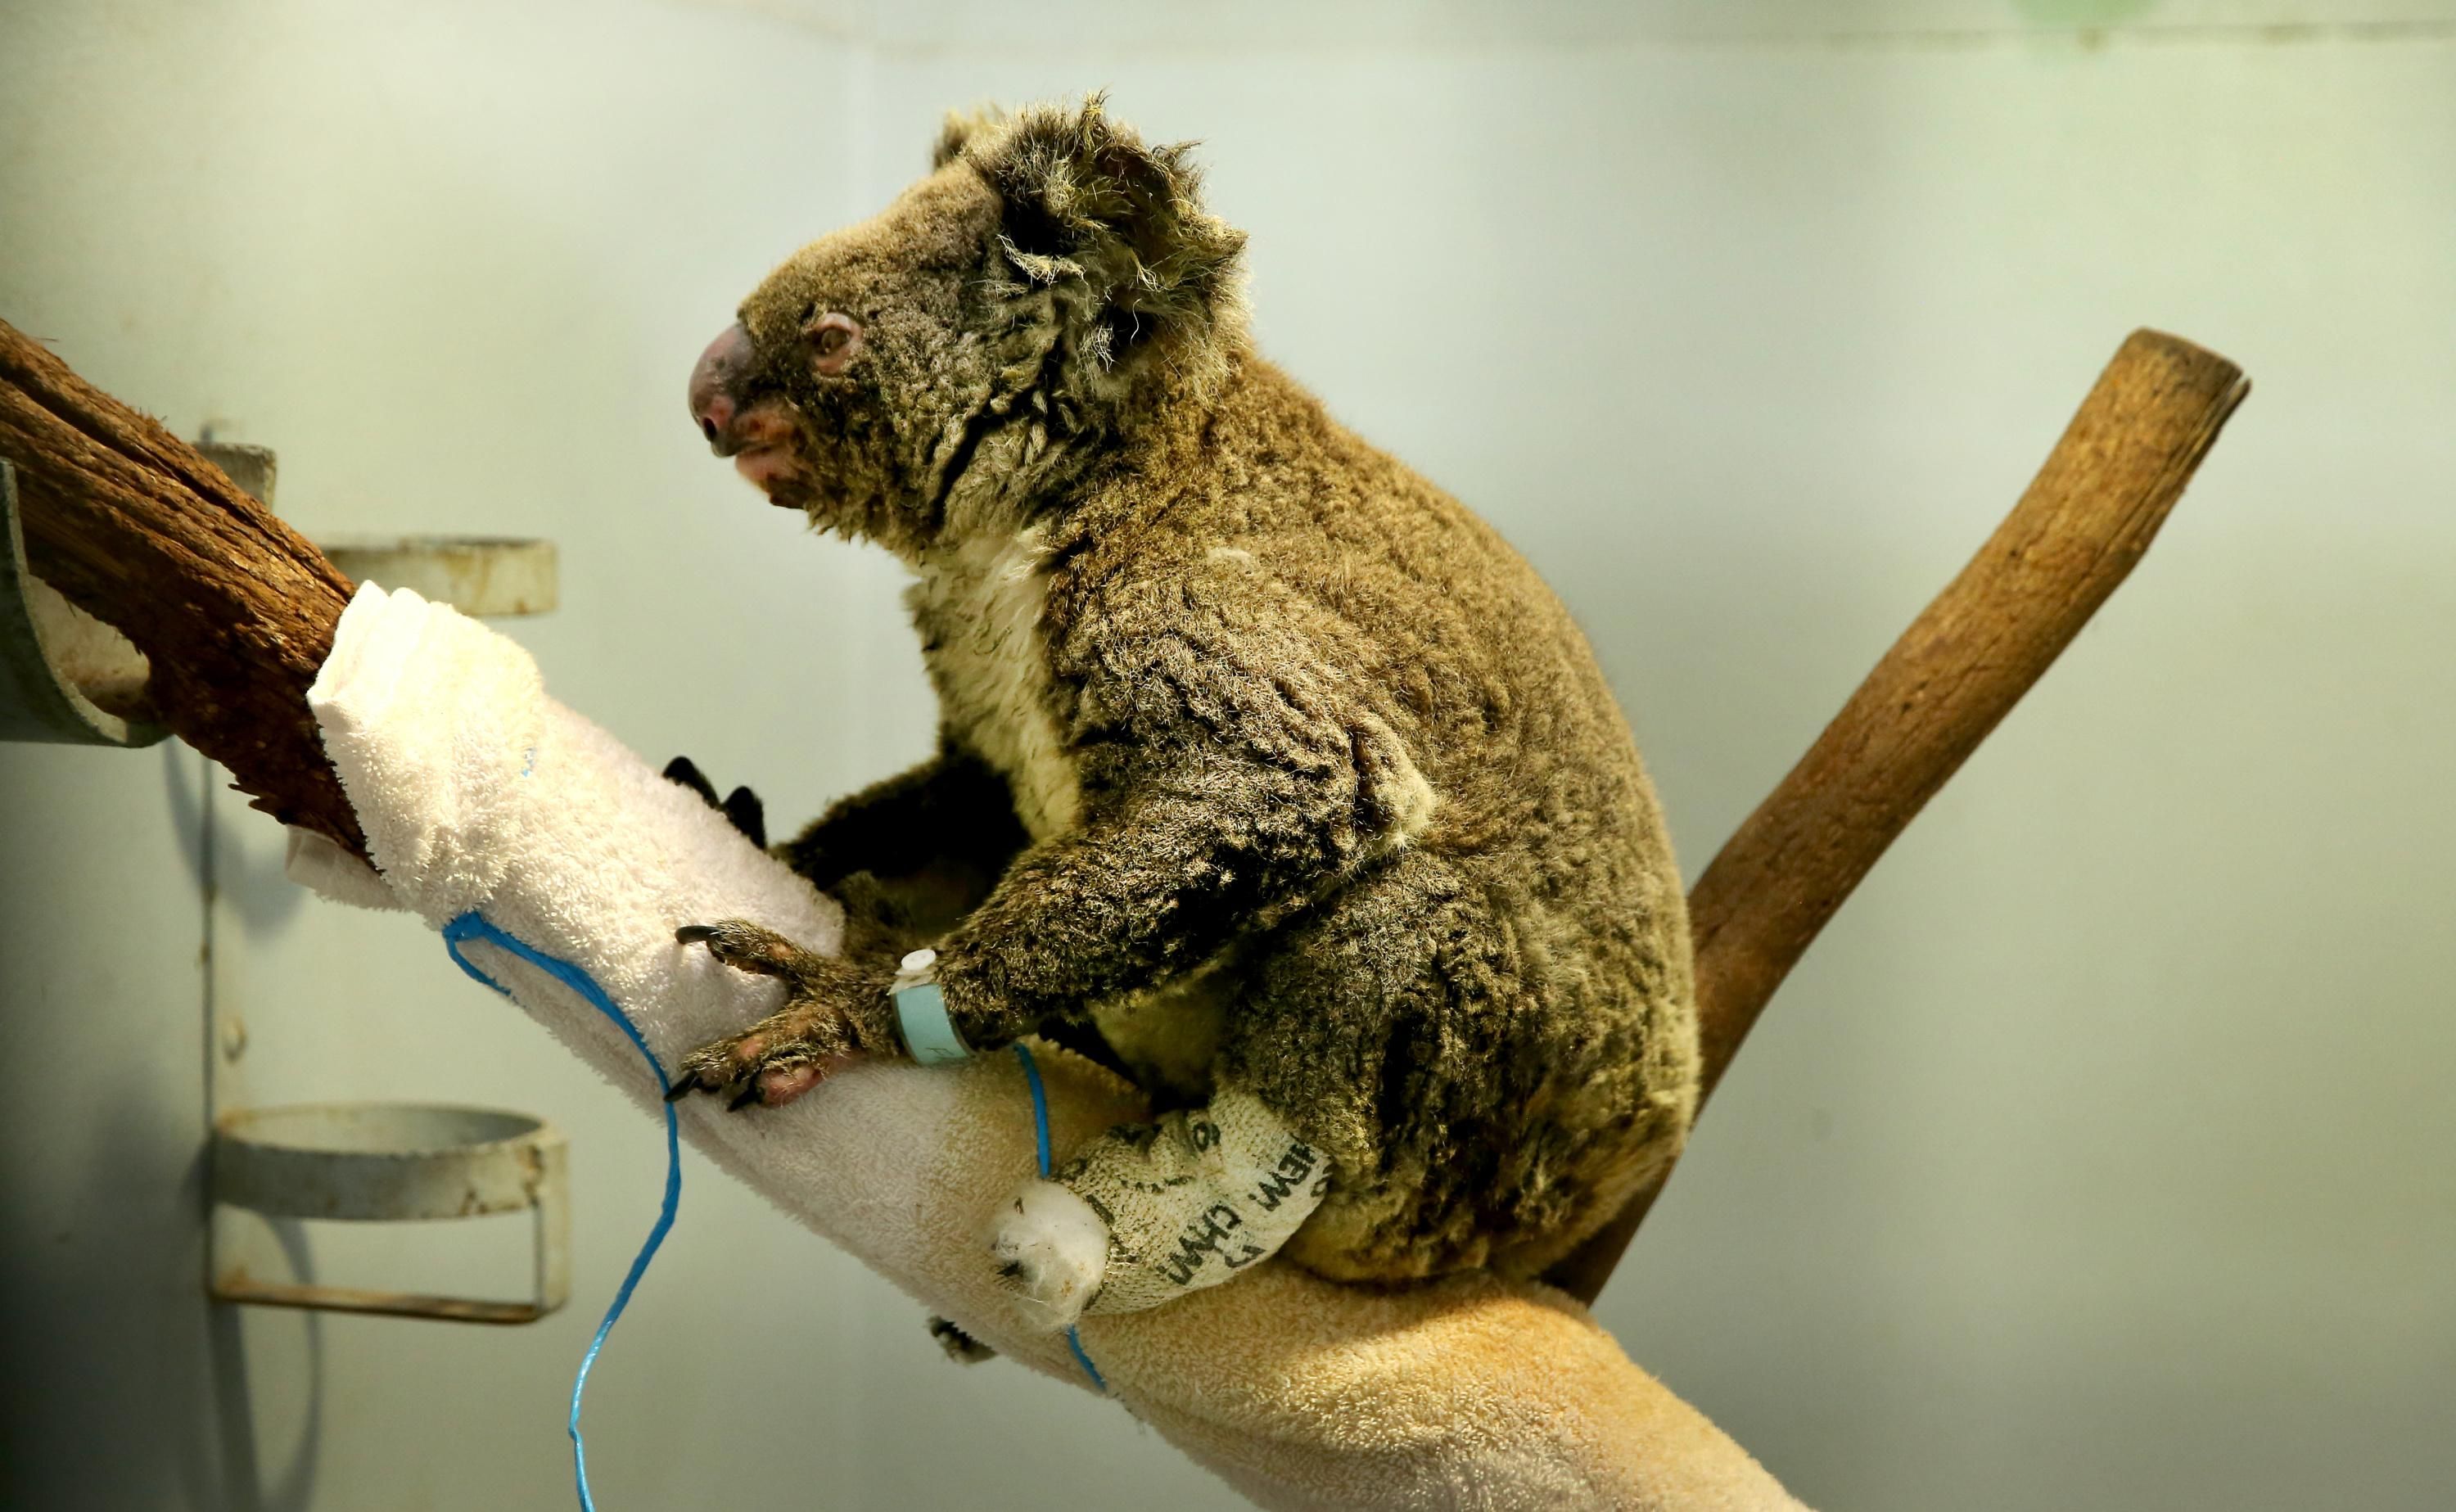 A Koala recovers from burns at a hospital in Australia